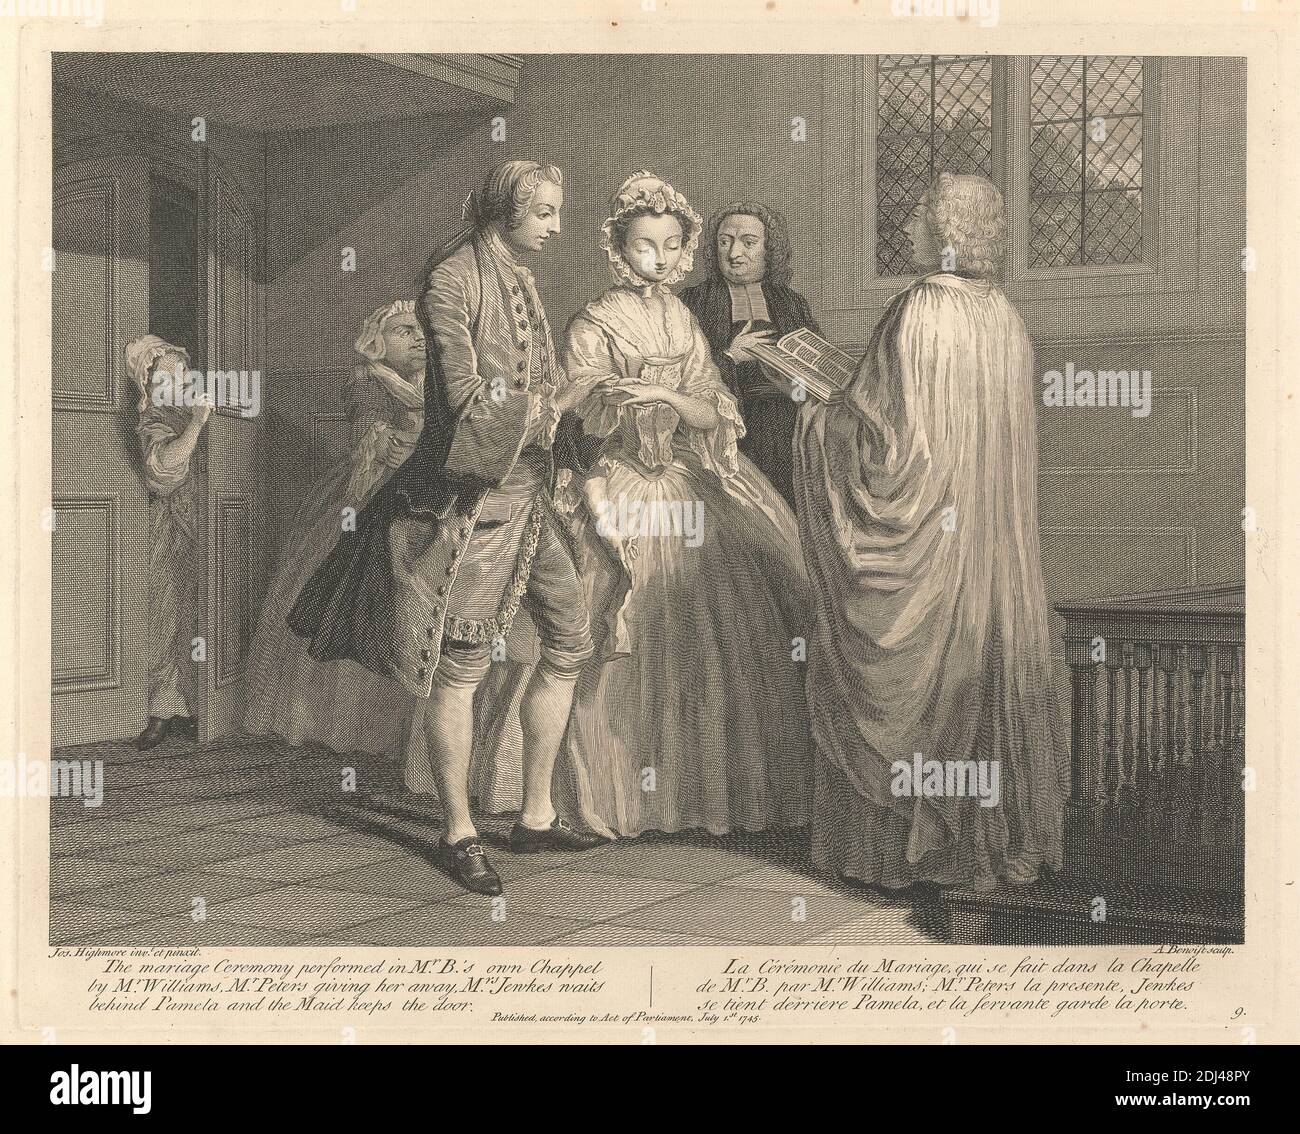 The Marriage Ceremony performed in Mr. B.'s own Chappel by Mr. Williams, Mr. Peters giving her away, Mrs. Jewkes waits behind Pamela and the Maid keeps the door, Print made by Guillaume Philippe Benoist, 1725–ca. 1770, French, after Joseph Highmore, 1692–1780, British, 1745, Etching with stipple engraving on medium, slightly textured, cream laid paper, Sheet: 15 3/8 x 21 1/4 inches (39 x 54 cm), Plate: 11 13/16 x 14 13/16 inches (30 x 37.7 cm), and Image: 10 7/16 x 14 1/8 inches (26.5 x 35.8 cm), bride, ceremony, chapel, dress, genre subject, gloves, groom, literary theme, maid, marriage, men Stock Photo